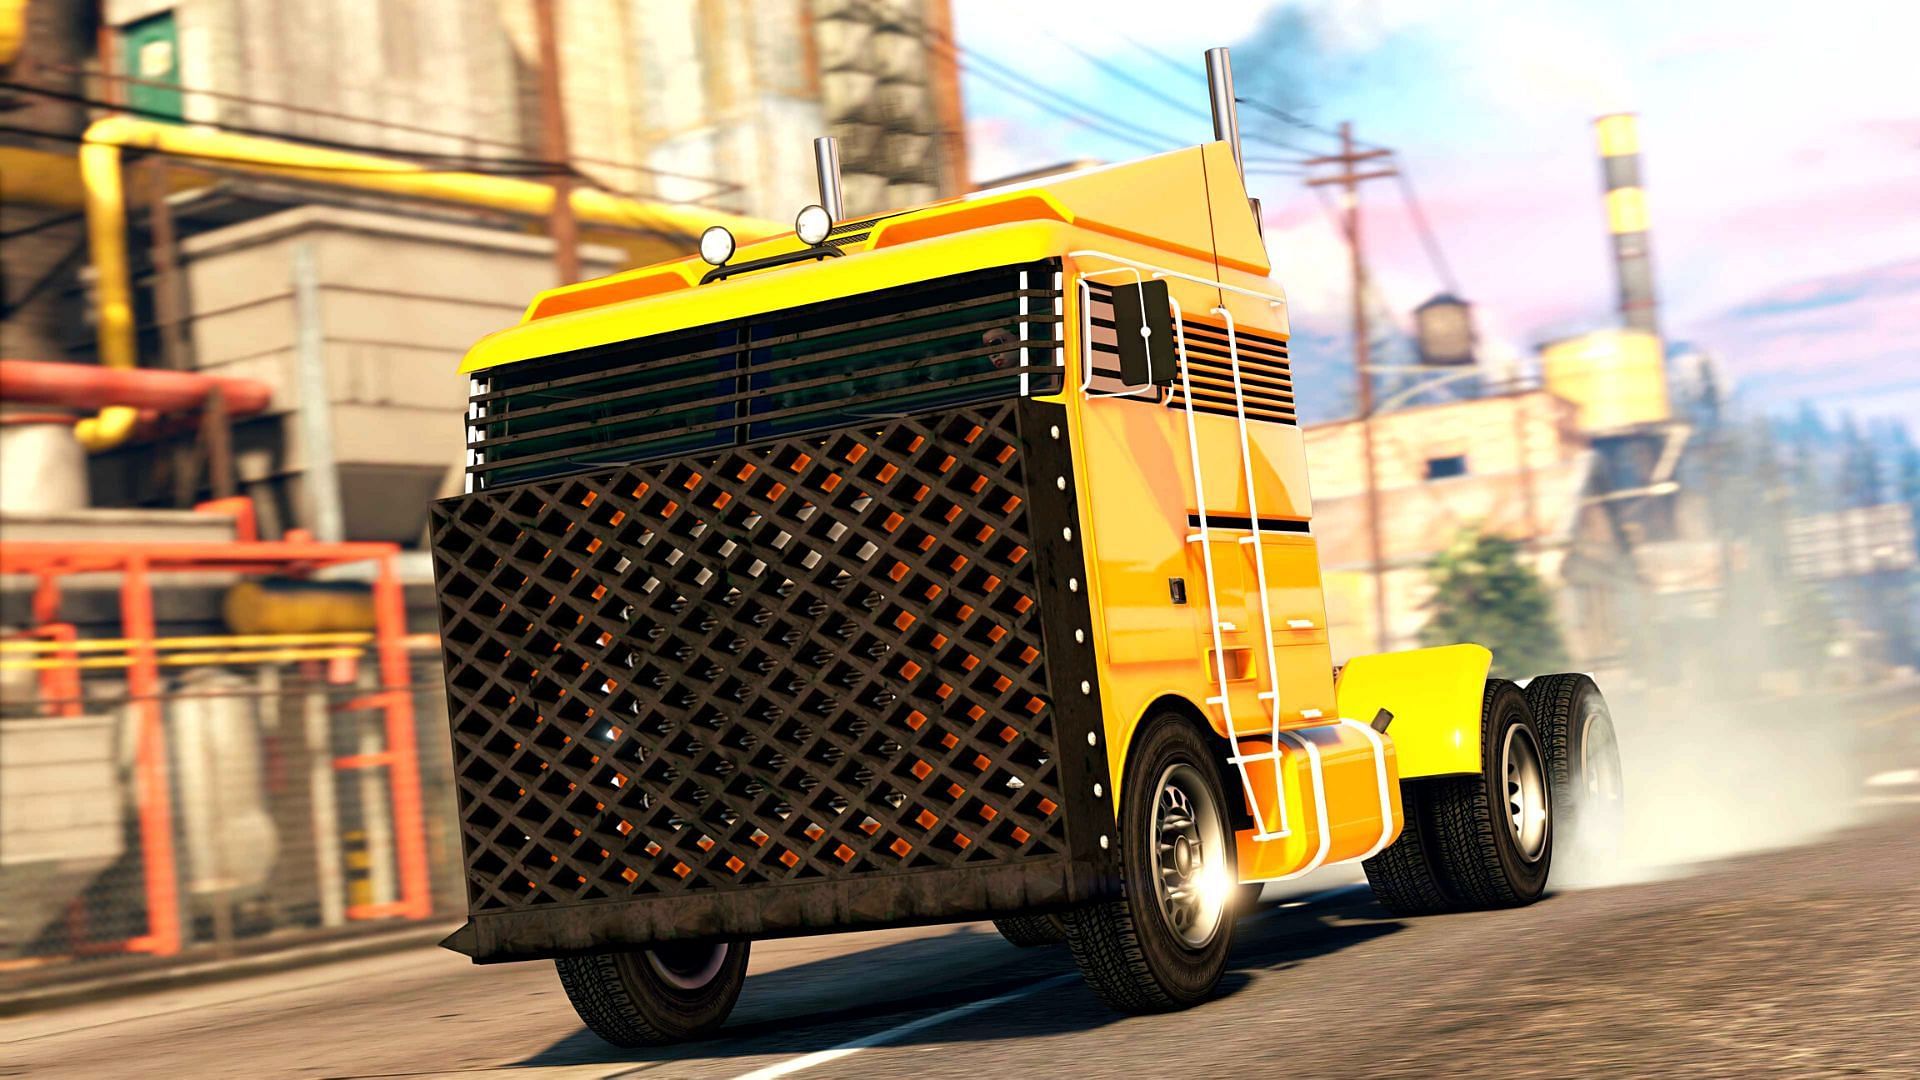 MOC is available at a discounted price in GTA Online this week (Image via Rockstar Games)